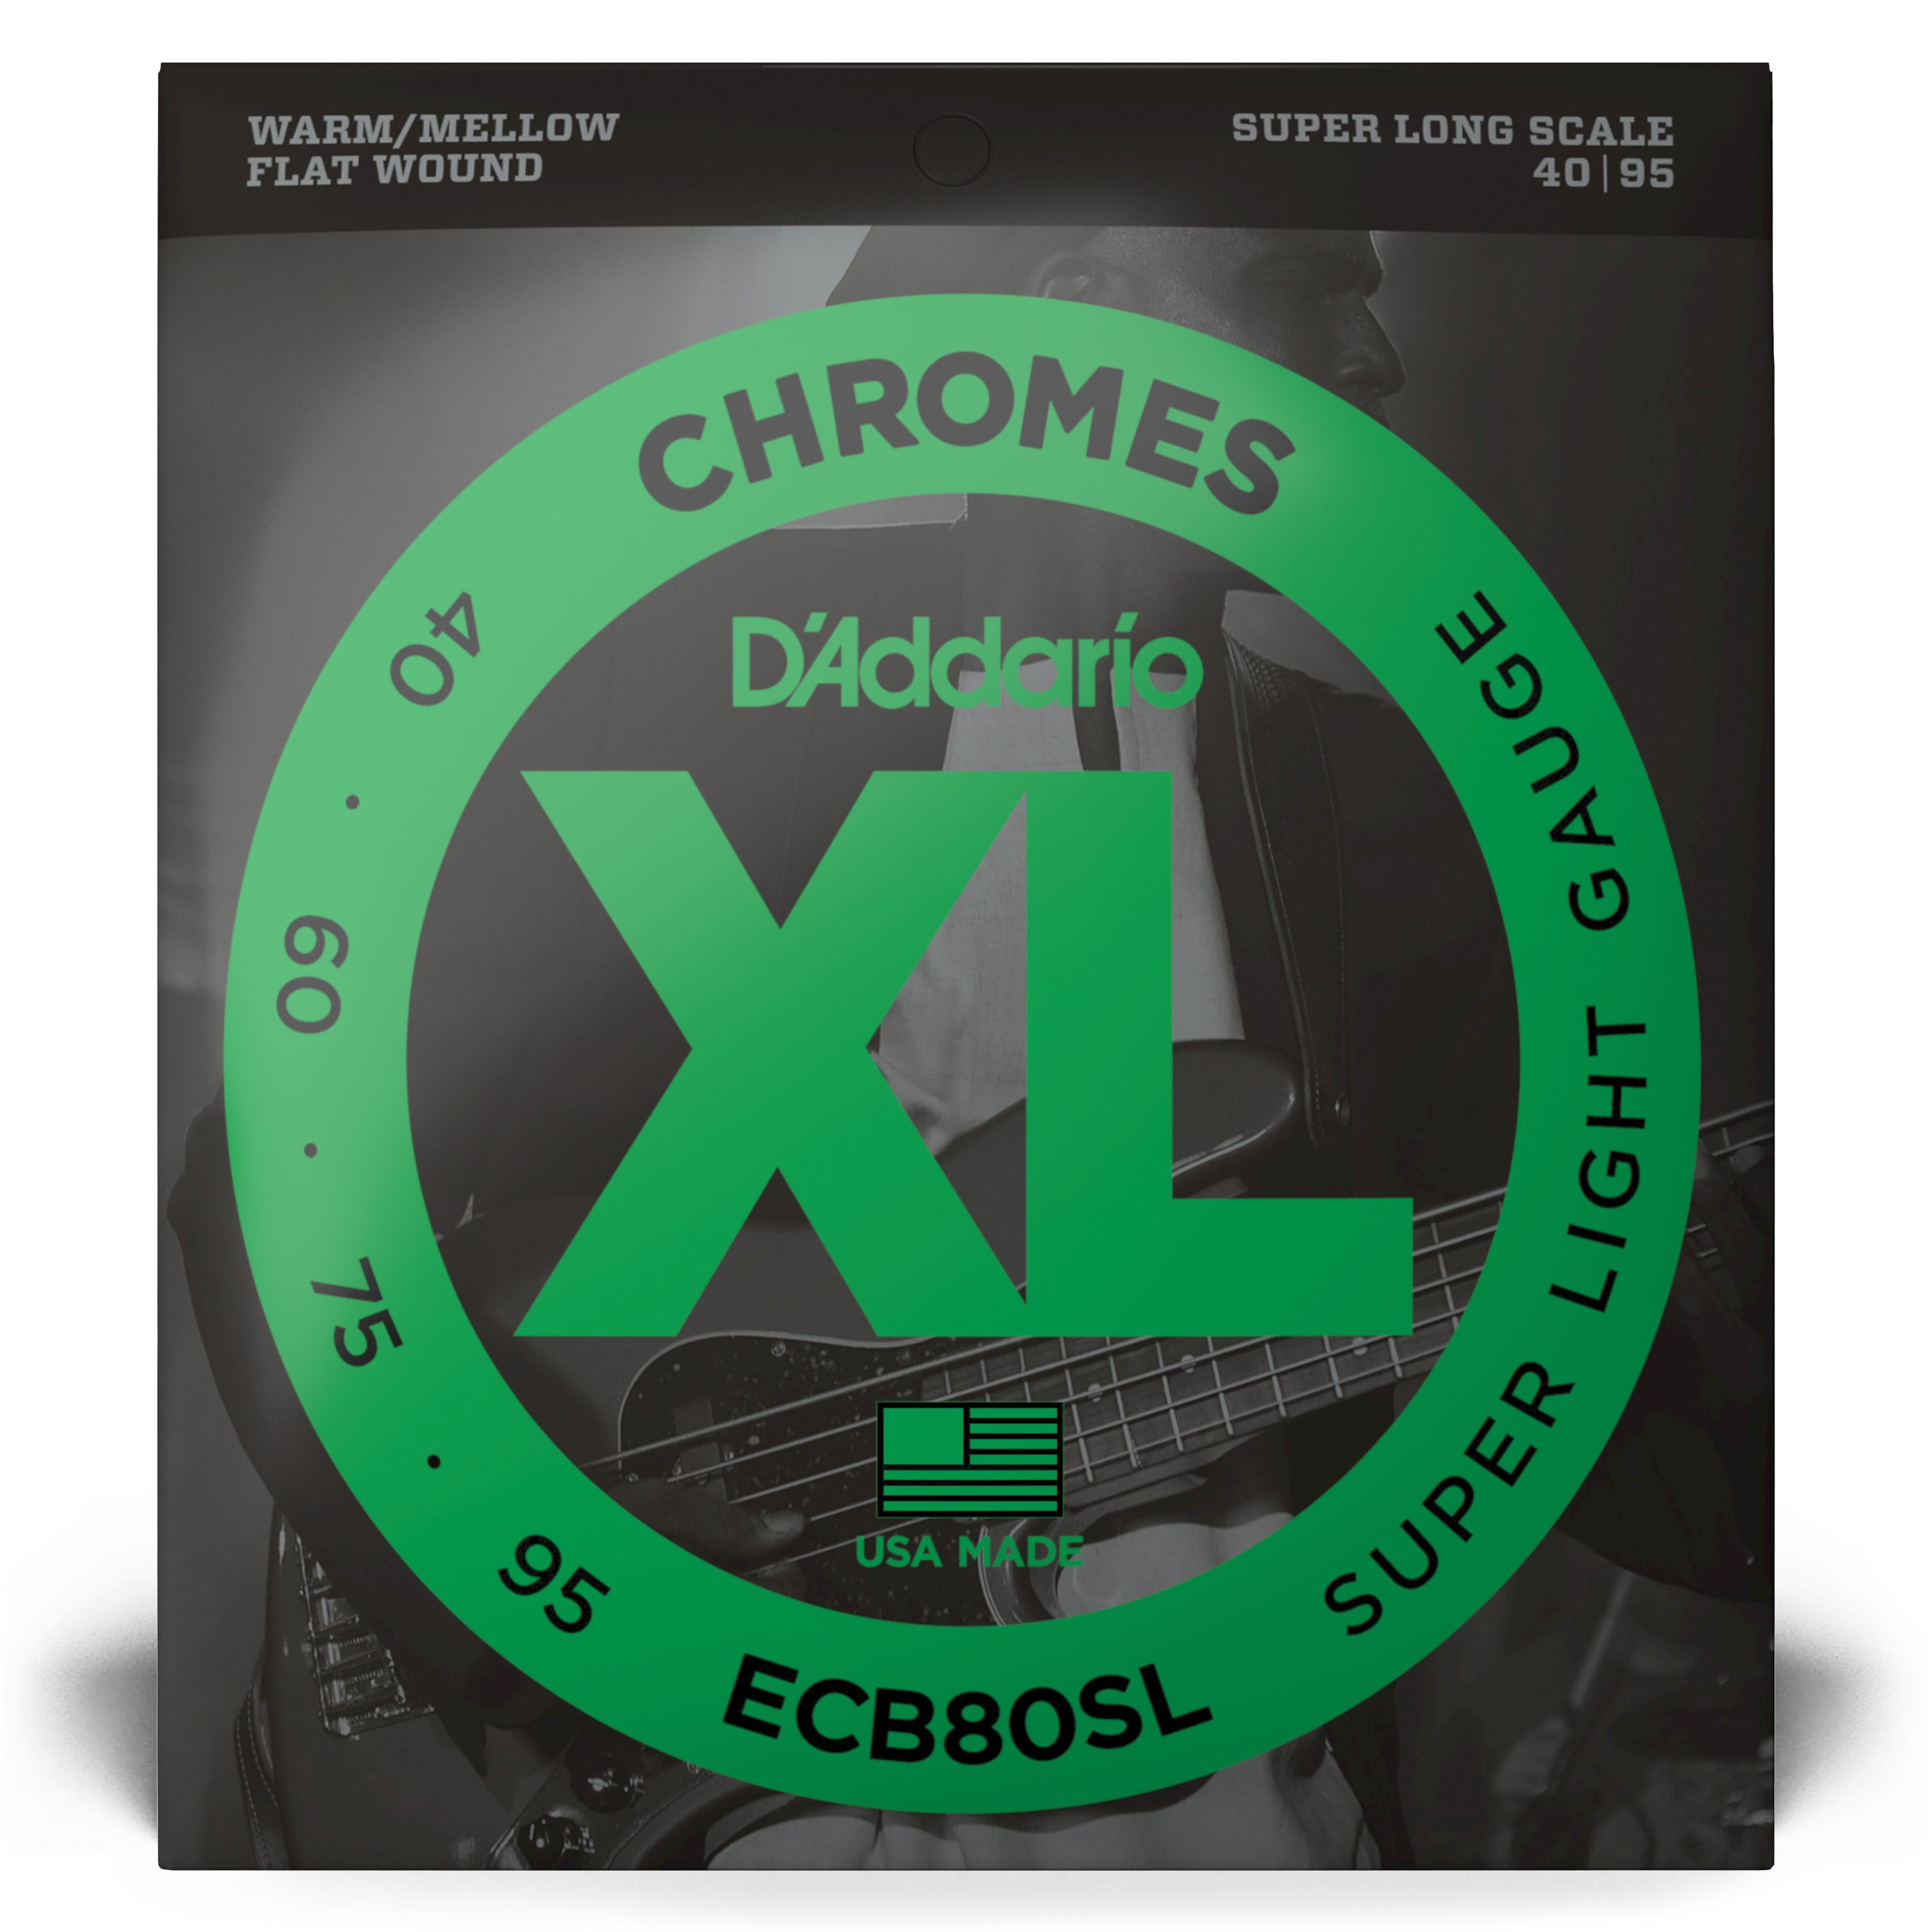 D'Addario Chromes 40-95 Stainless Steel Flatwound Bass Guitar Strings, Super Long Scale [ECB80SL]